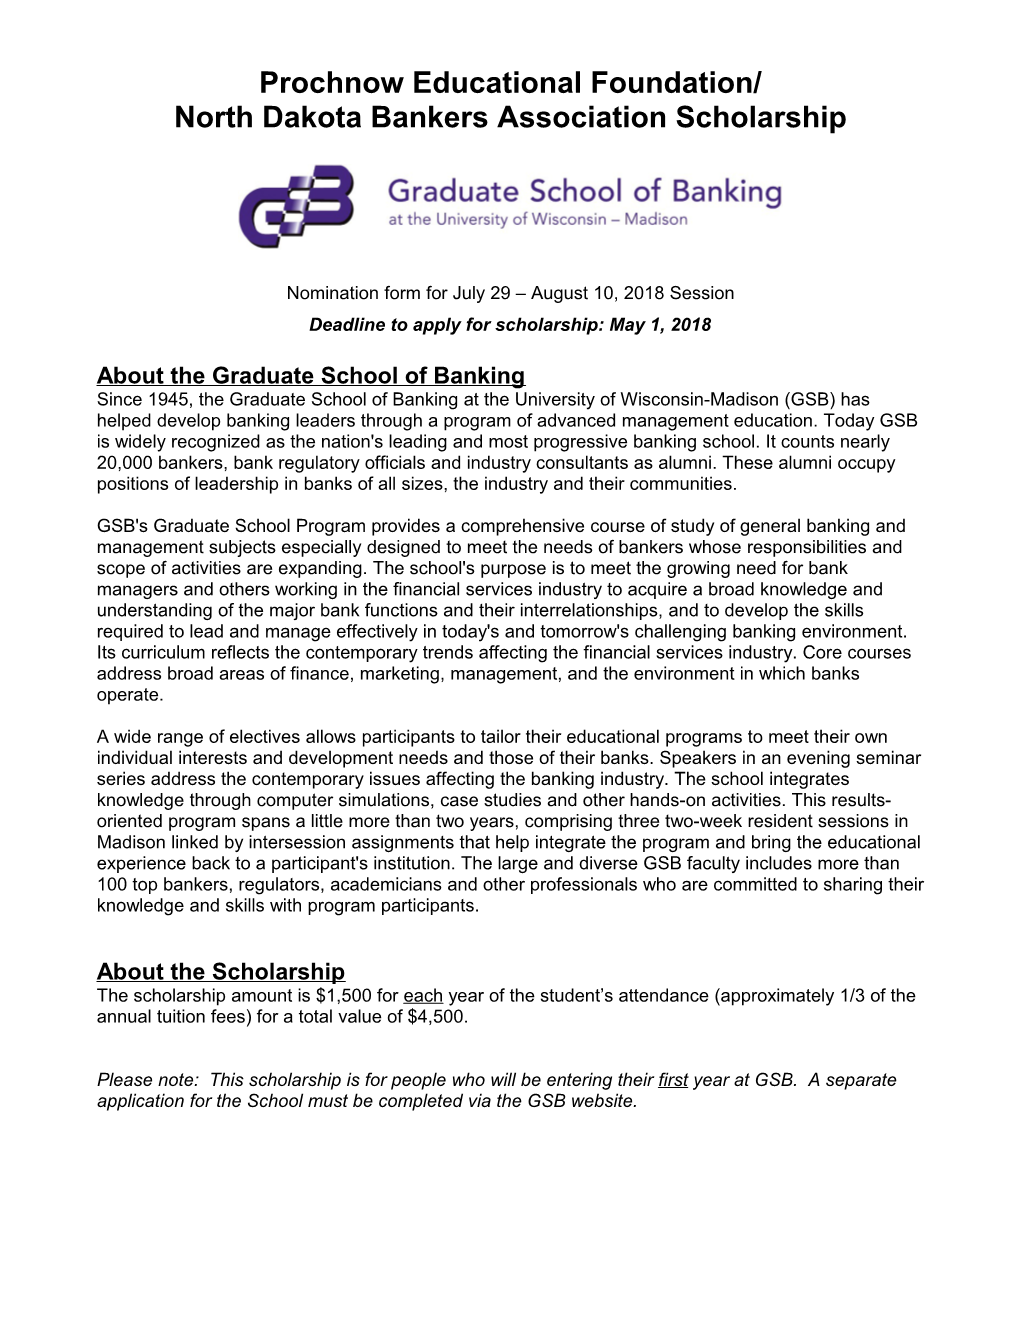 Prochnow Educational Foundation/Wisconsin Bankers Association Scholarship For